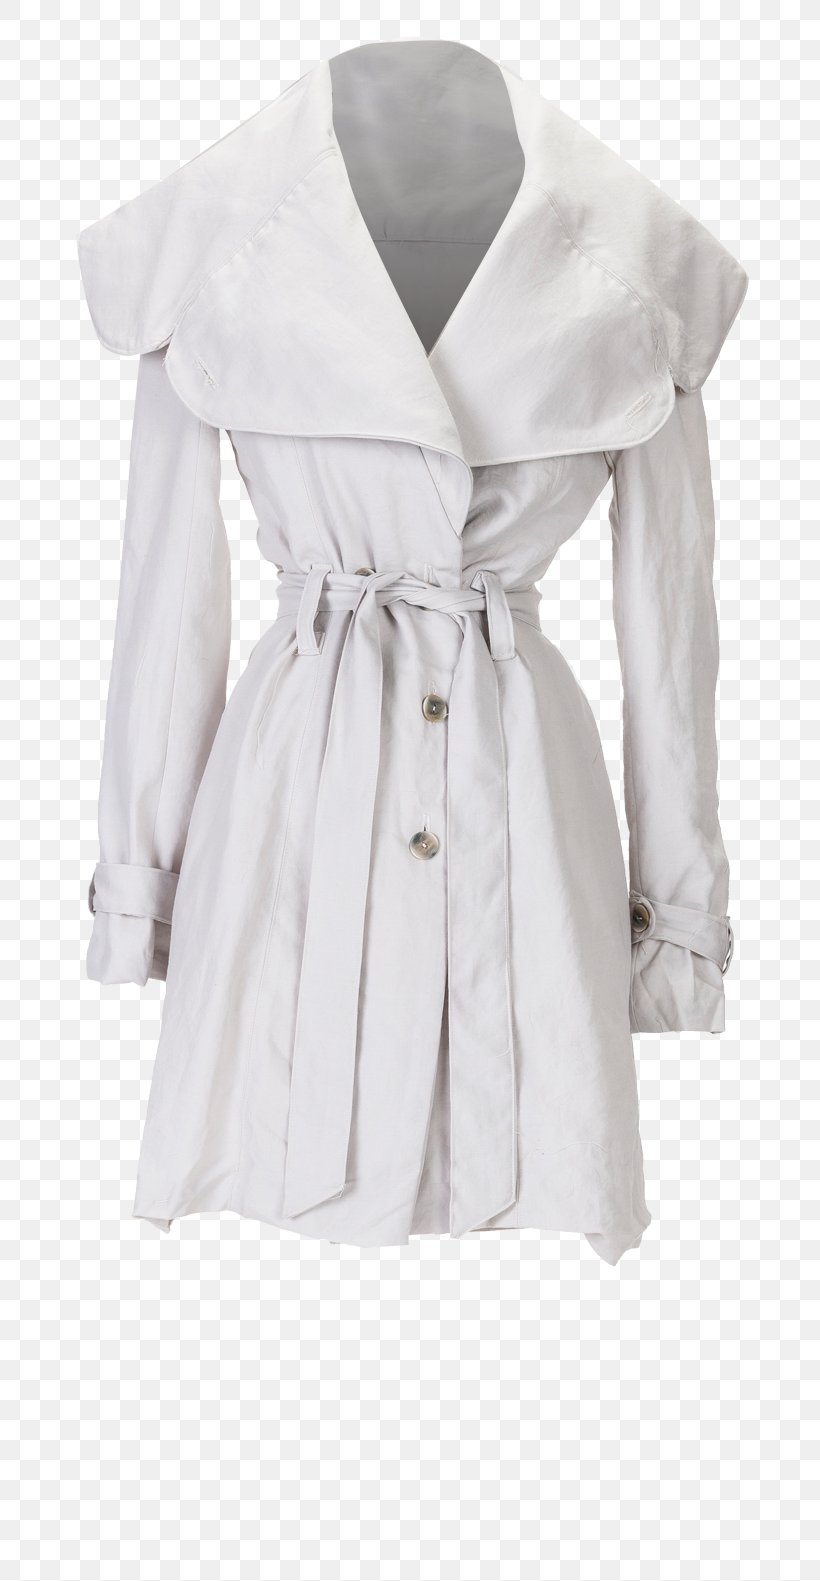 Robe Clothing Trench Coat Sleeve Dress, PNG, 806x1581px, Robe, Clothing, Coat, Day Dress, Dress Download Free